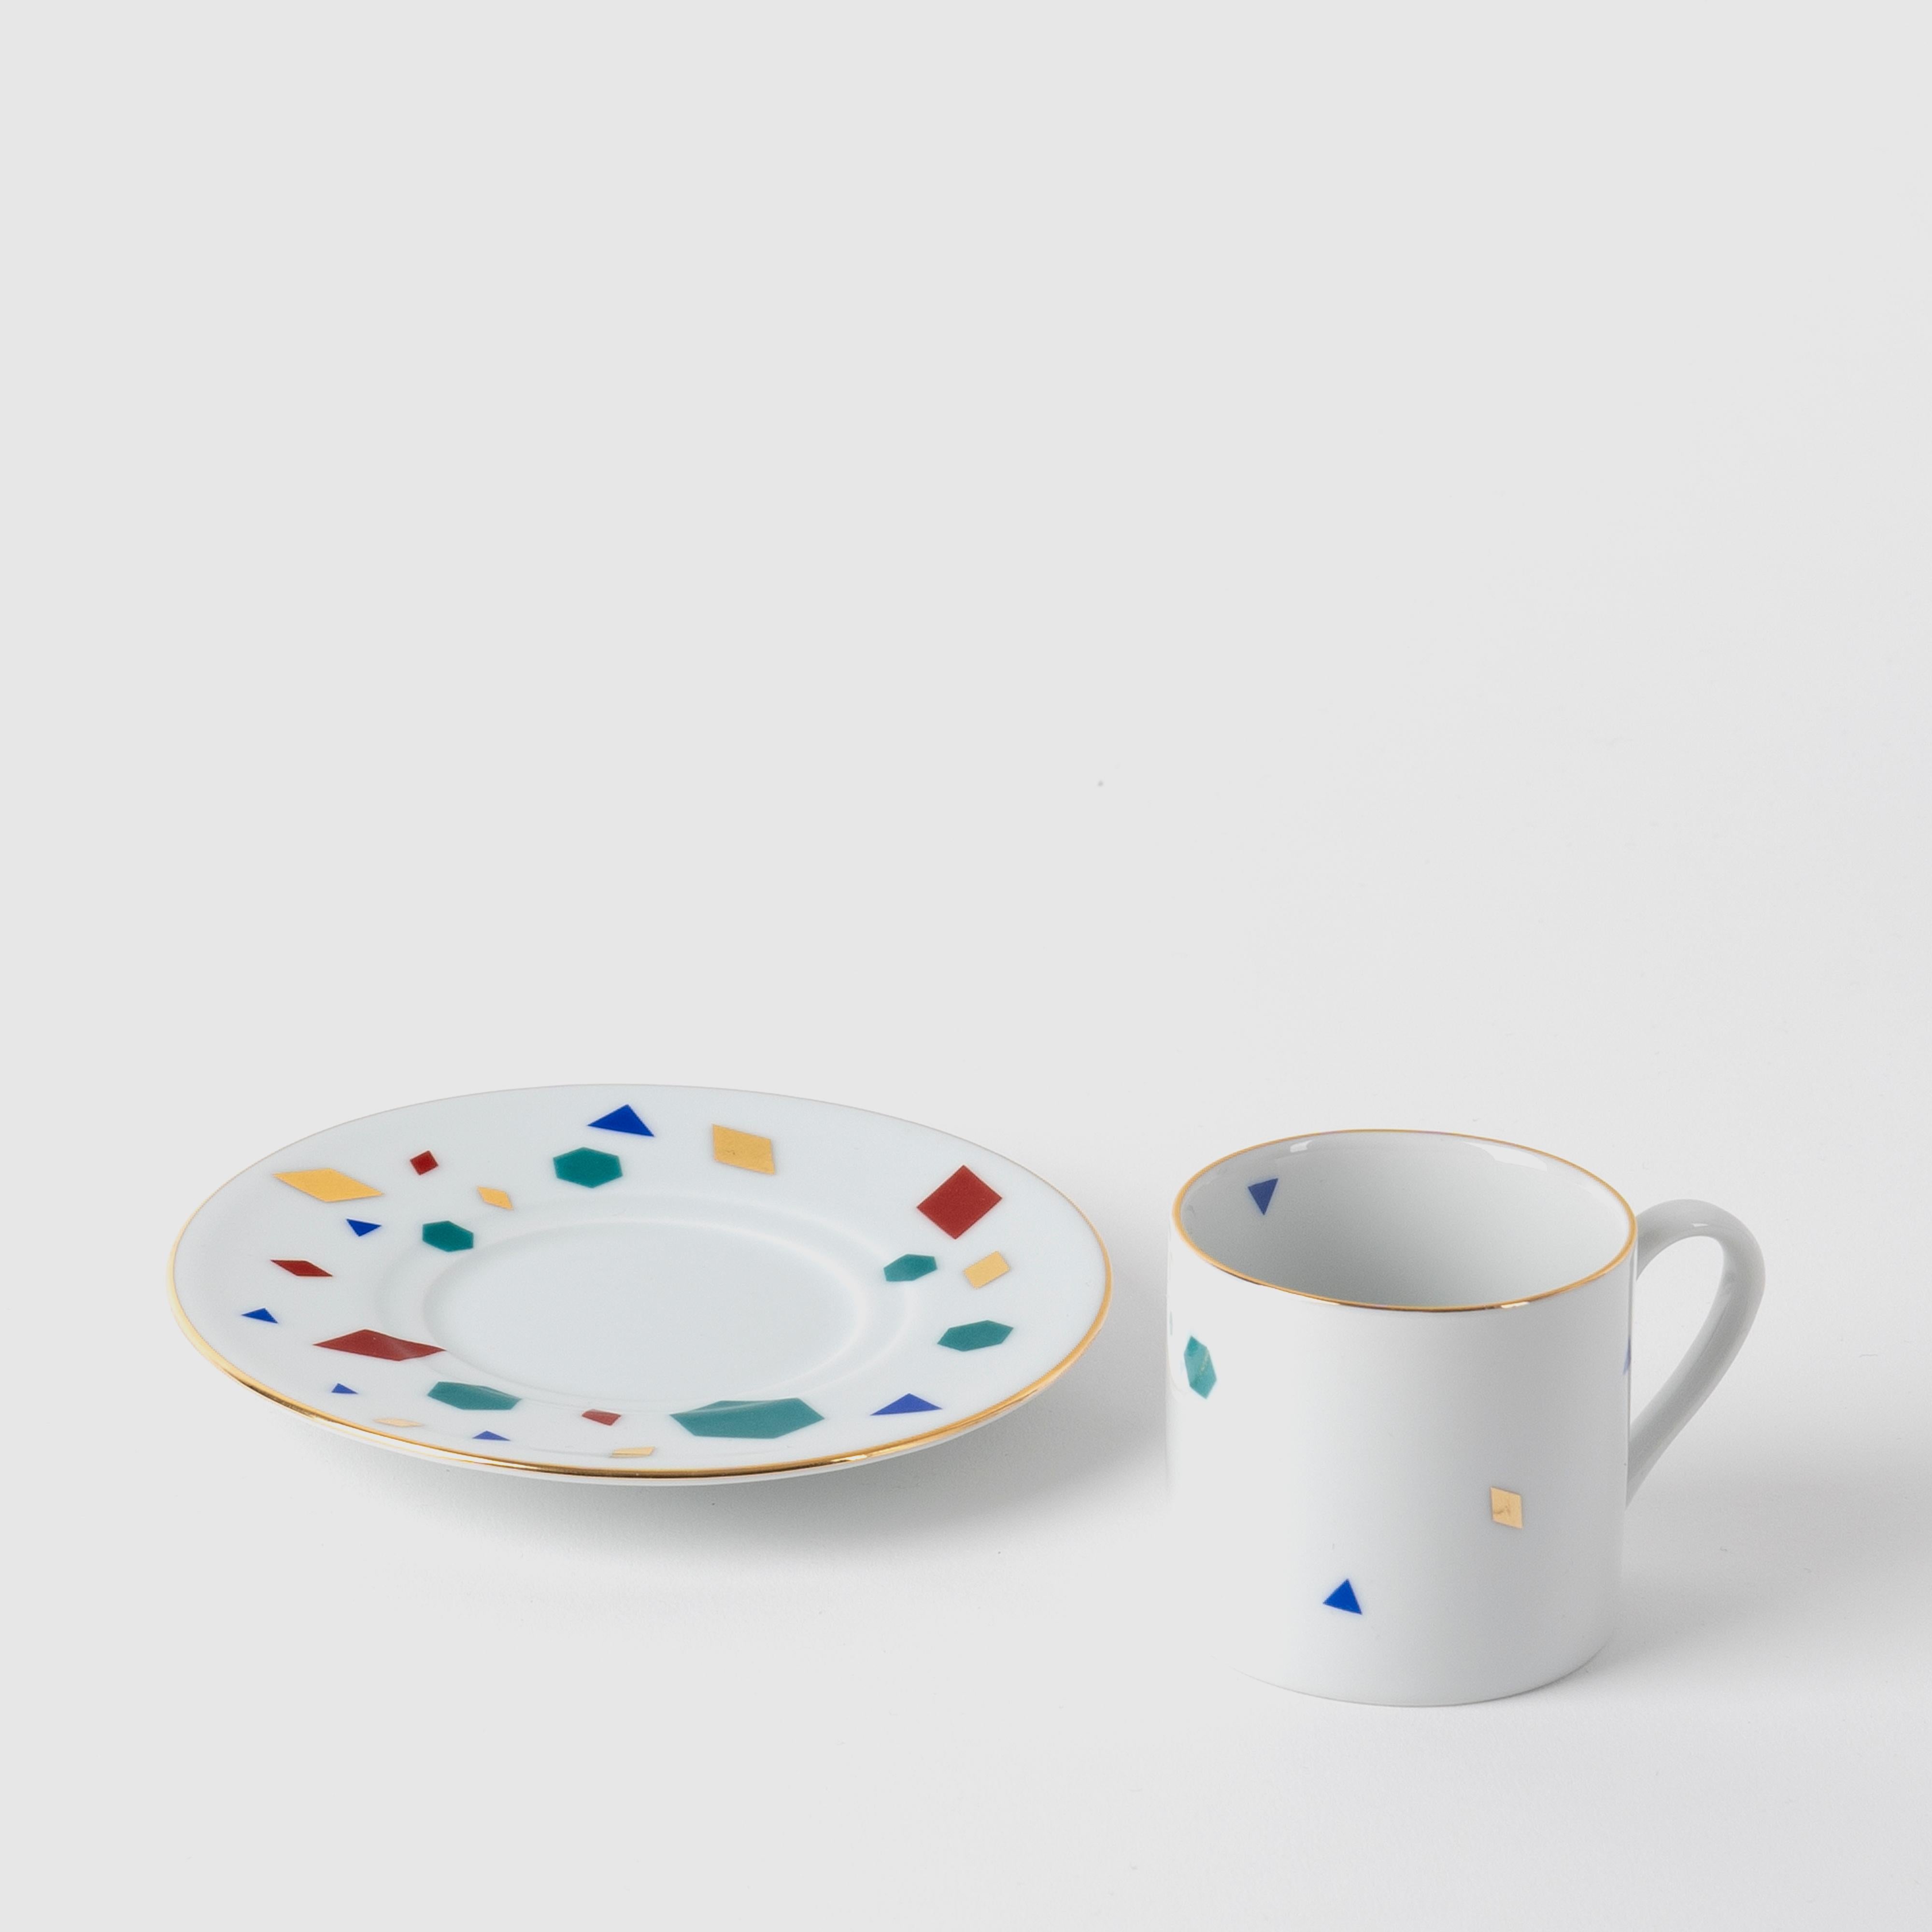 Contemporary Modern, Çini Decorated Porcelain Coffee Cup &Saucer 90ml, Set of 2  In New Condition For Sale In İstanbul, İstanbul